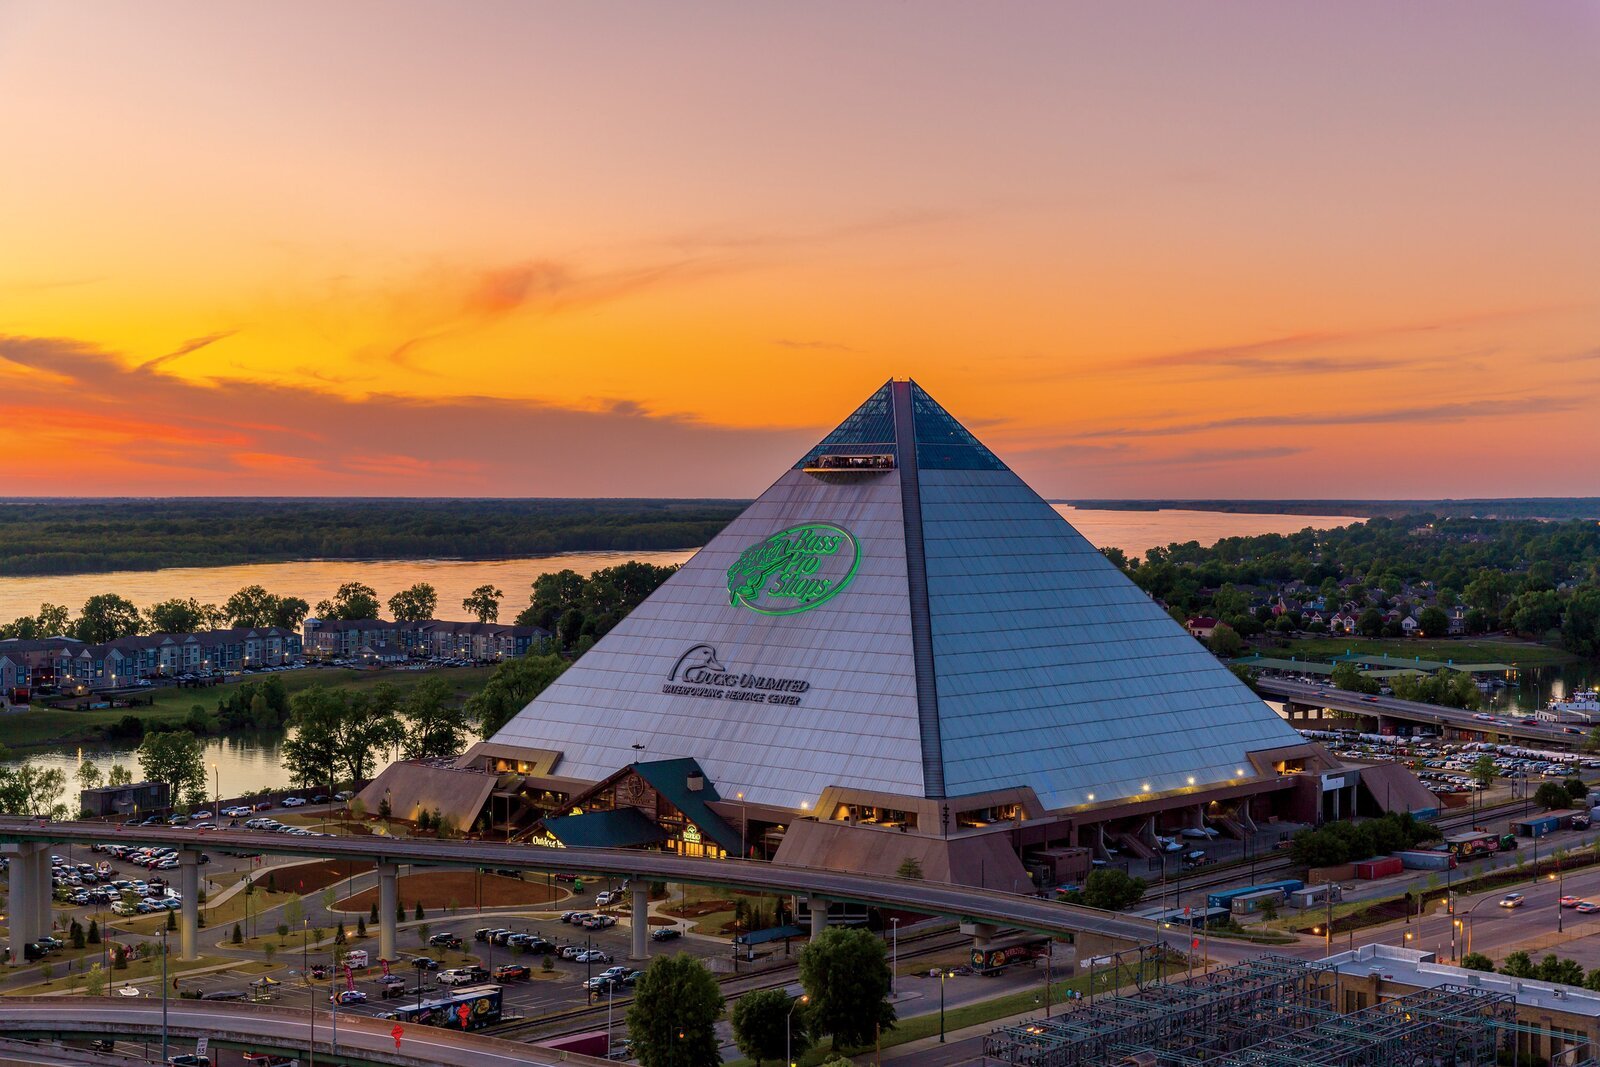 The Best Hotel in America Is Inside the Memphis Pyramid